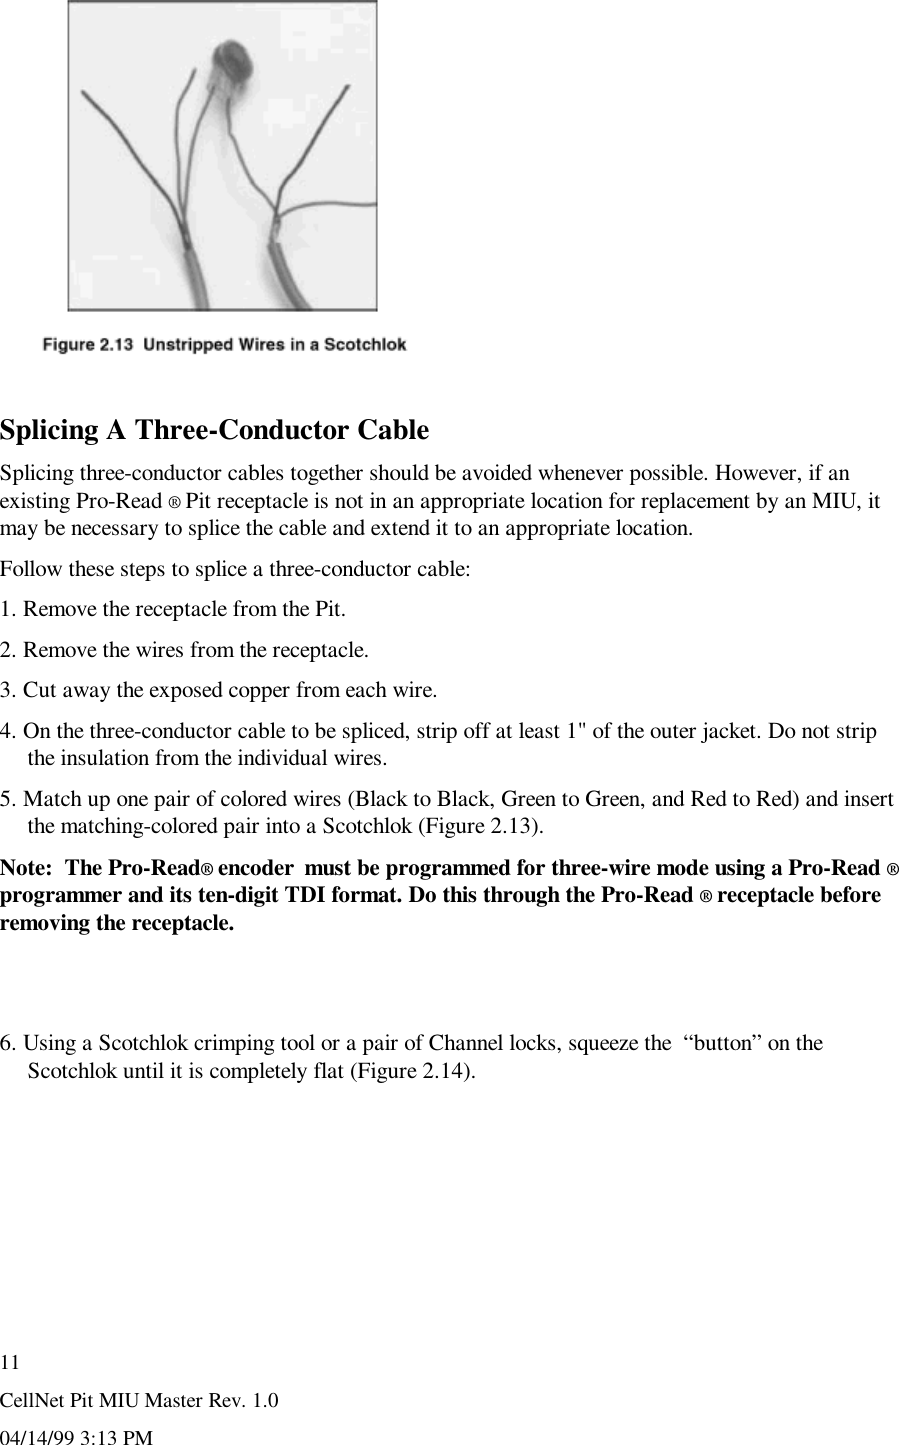 CellNet Pit MIU Master Rev. 1.004/14/99 3:13 PM11Splicing A Three-Conductor CableSplicing three-conductor cables together should be avoided whenever possible. However, if anexisting Pro-Read ® Pit receptacle is not in an appropriate location for replacement by an MIU, itmay be necessary to splice the cable and extend it to an appropriate location.Follow these steps to splice a three-conductor cable:1. Remove the receptacle from the Pit.2. Remove the wires from the receptacle.3. Cut away the exposed copper from each wire.4. On the three-conductor cable to be spliced, strip off at least 1&quot; of the outer jacket. Do not stripthe insulation from the individual wires.5. Match up one pair of colored wires (Black to Black, Green to Green, and Red to Red) and insertthe matching-colored pair into a Scotchlok (Figure 2.13).Note:  The Pro-Read® encoder  must be programmed for three-wire mode using a Pro-Read ®programmer and its ten-digit TDI format. Do this through the Pro-Read ® receptacle beforeremoving the receptacle.6. Using a Scotchlok crimping tool or a pair of Channel locks, squeeze the  “button” on theScotchlok until it is completely flat (Figure 2.14).